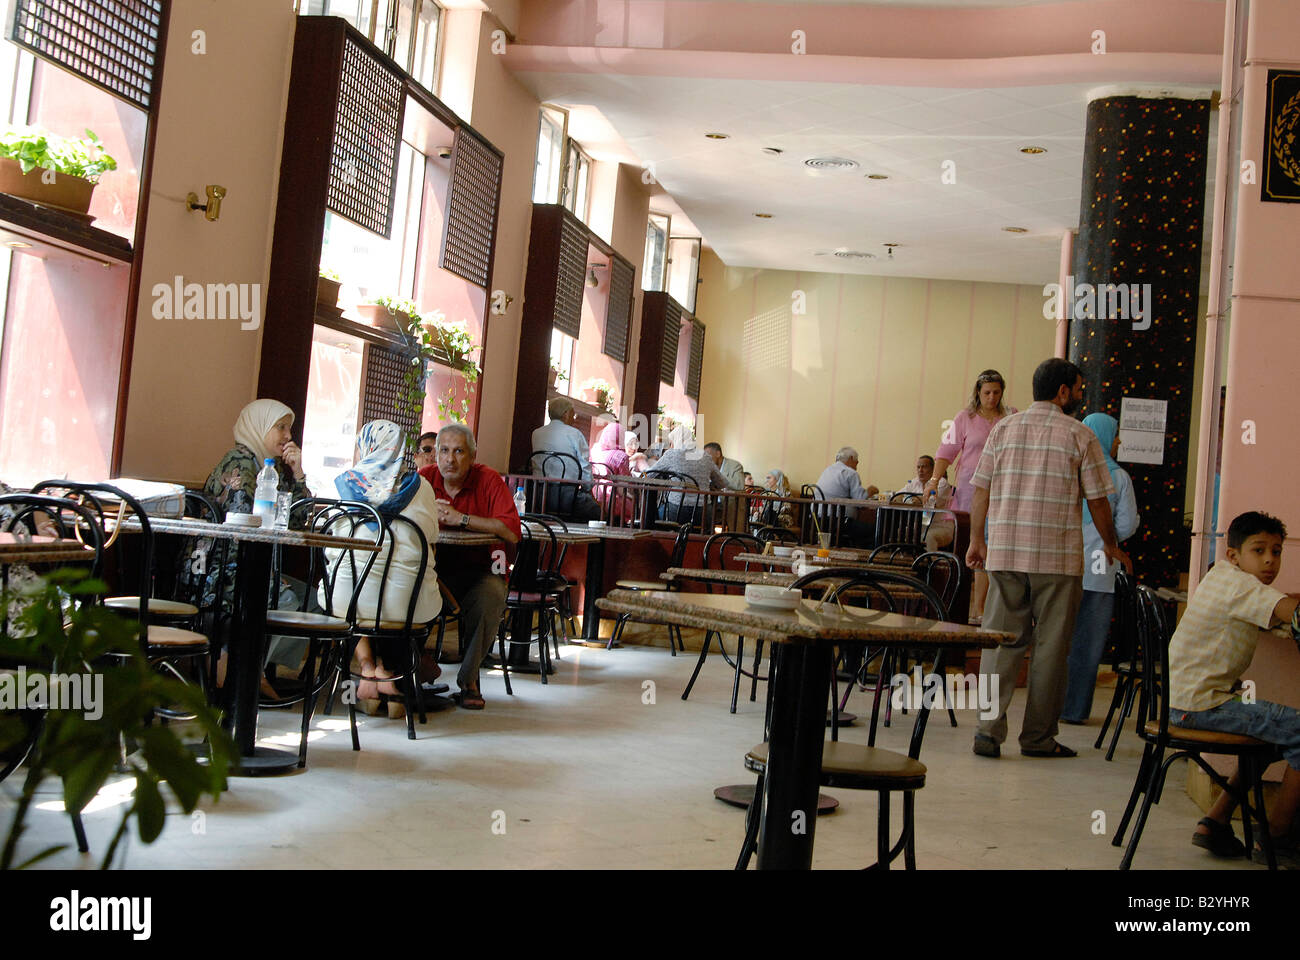 Typical art deco interior design forms Cairo's well known coffeehouse Groppi in Downtown Stock Photo